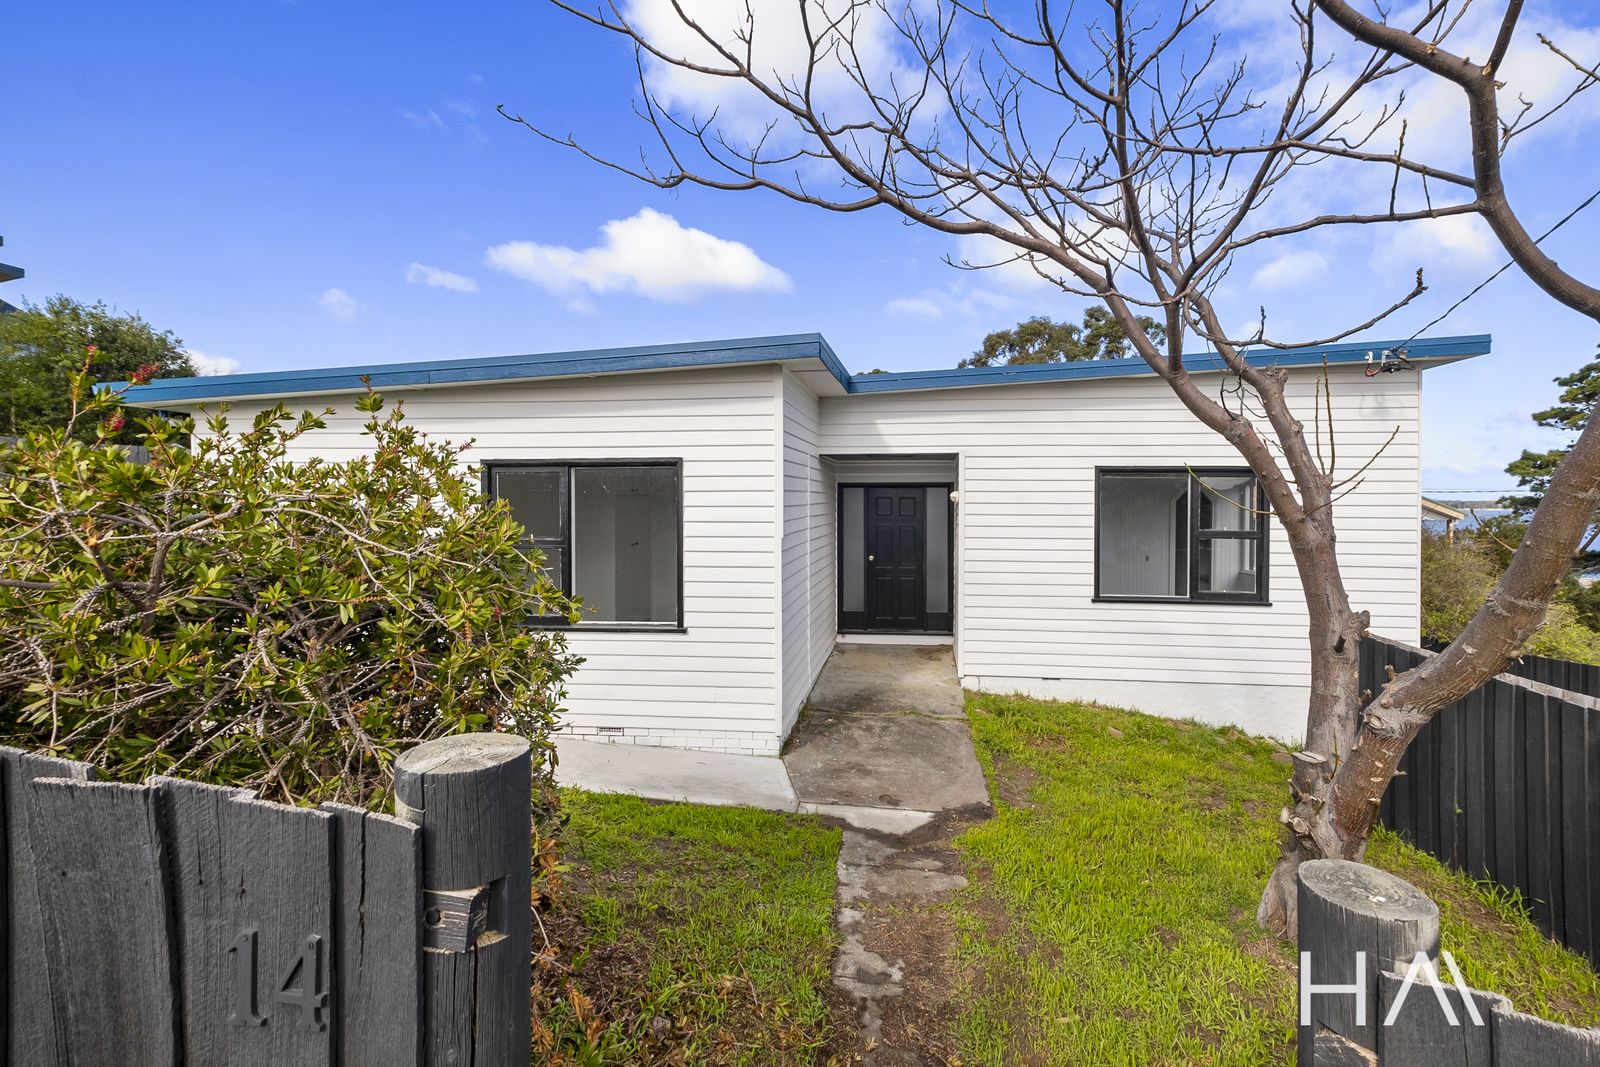 2 bedrooms House in 14 Toongabbie St MIDWAY POINT TAS, 7171